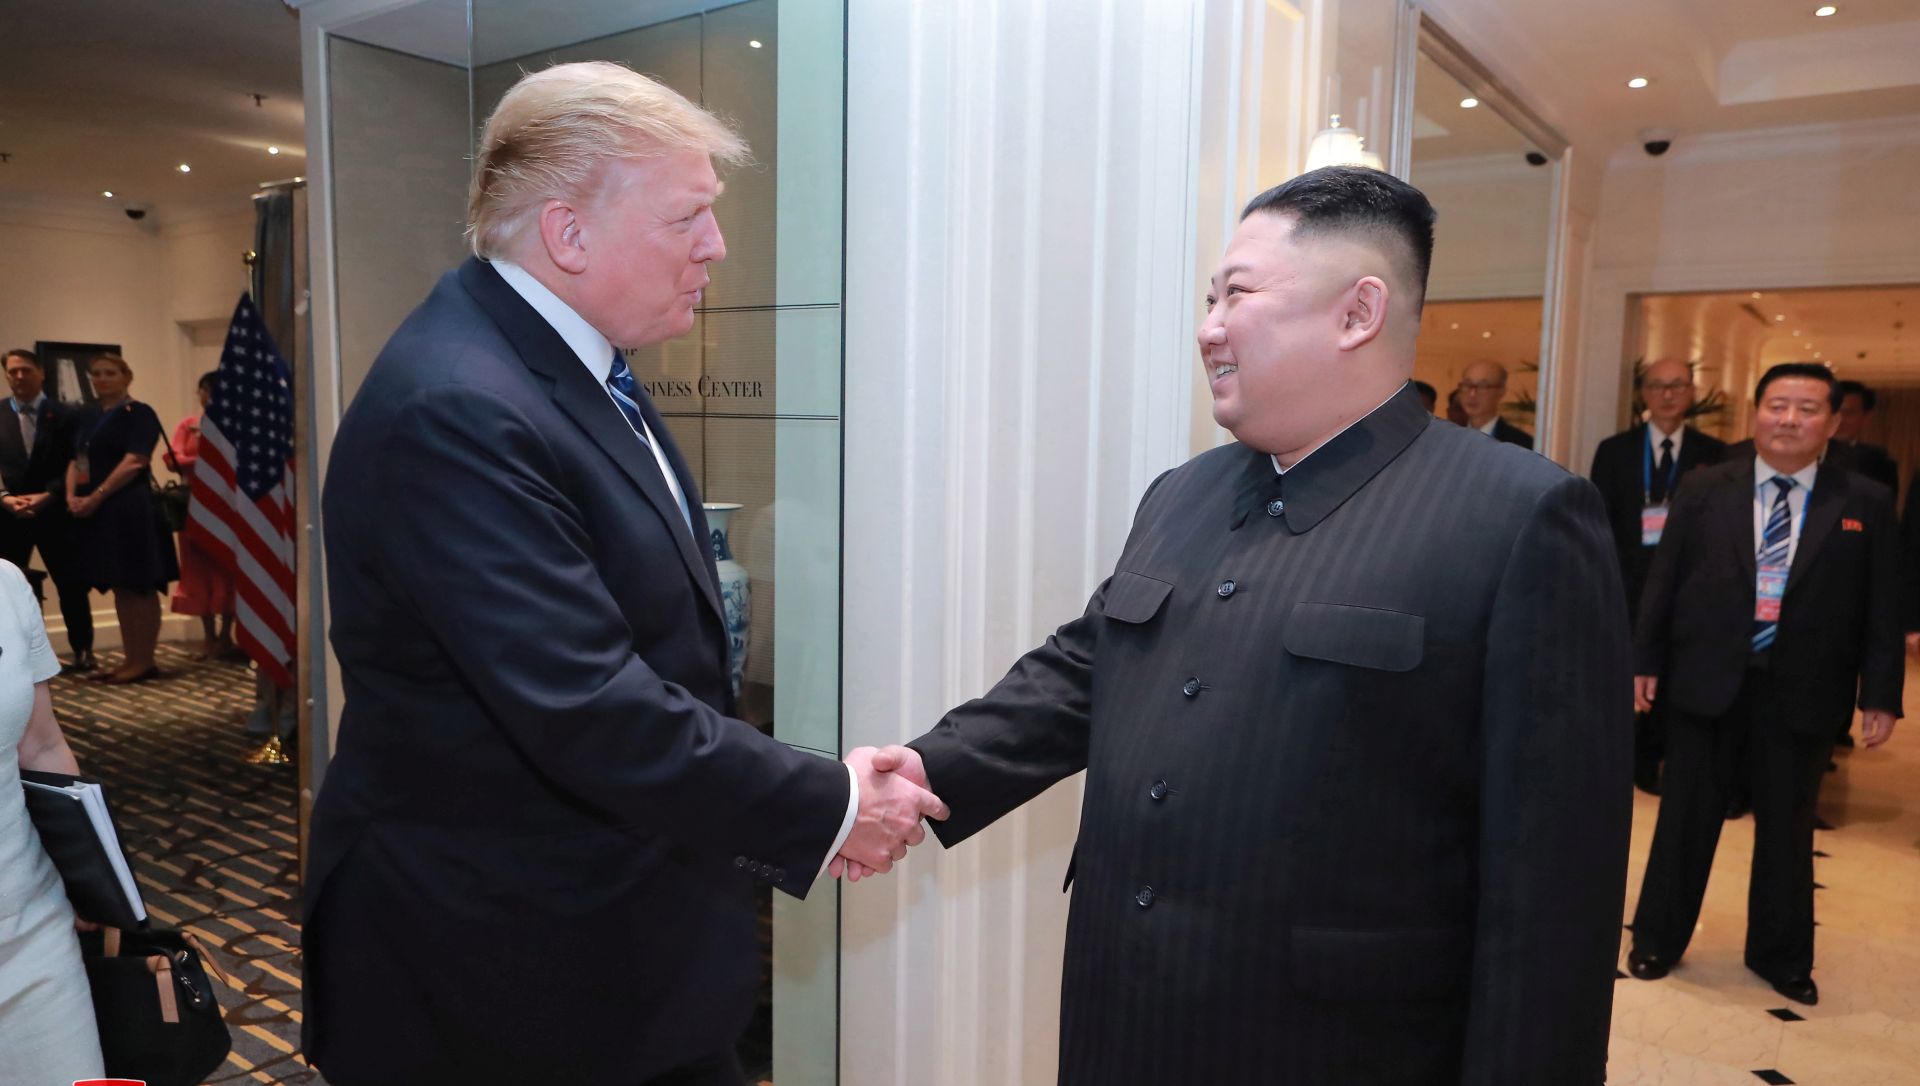 epa07405236 A photo released by the official North Korean Central News Agency (KCNA) shows North Korean leader Kim Jong Un (R) and US President Donald J. Trump (L) meeting in Hanoi, Vietnam, 28 February 2019.  The second meeting of the US President and the North Korean leader, running from 27 to 28 February 2019, focuses on furthering steps towards achieving peace and complete denuclearization of the Korean peninsula.  EPA/KCNA   EDITORIAL USE ONLY